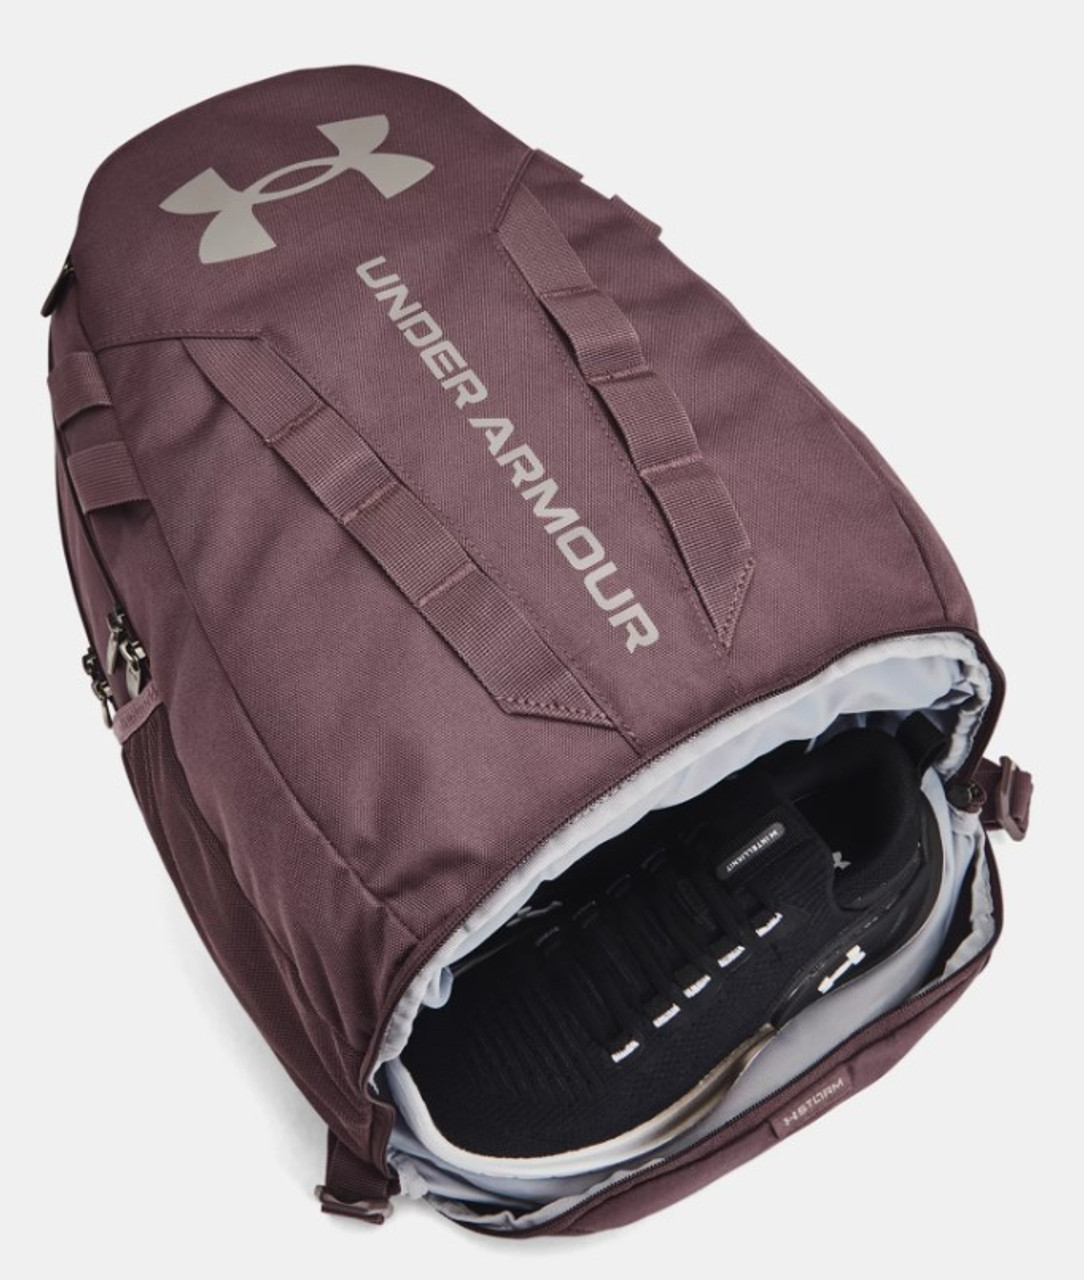 Under Armour Pitch Grey Hustle 5.0 Backpack